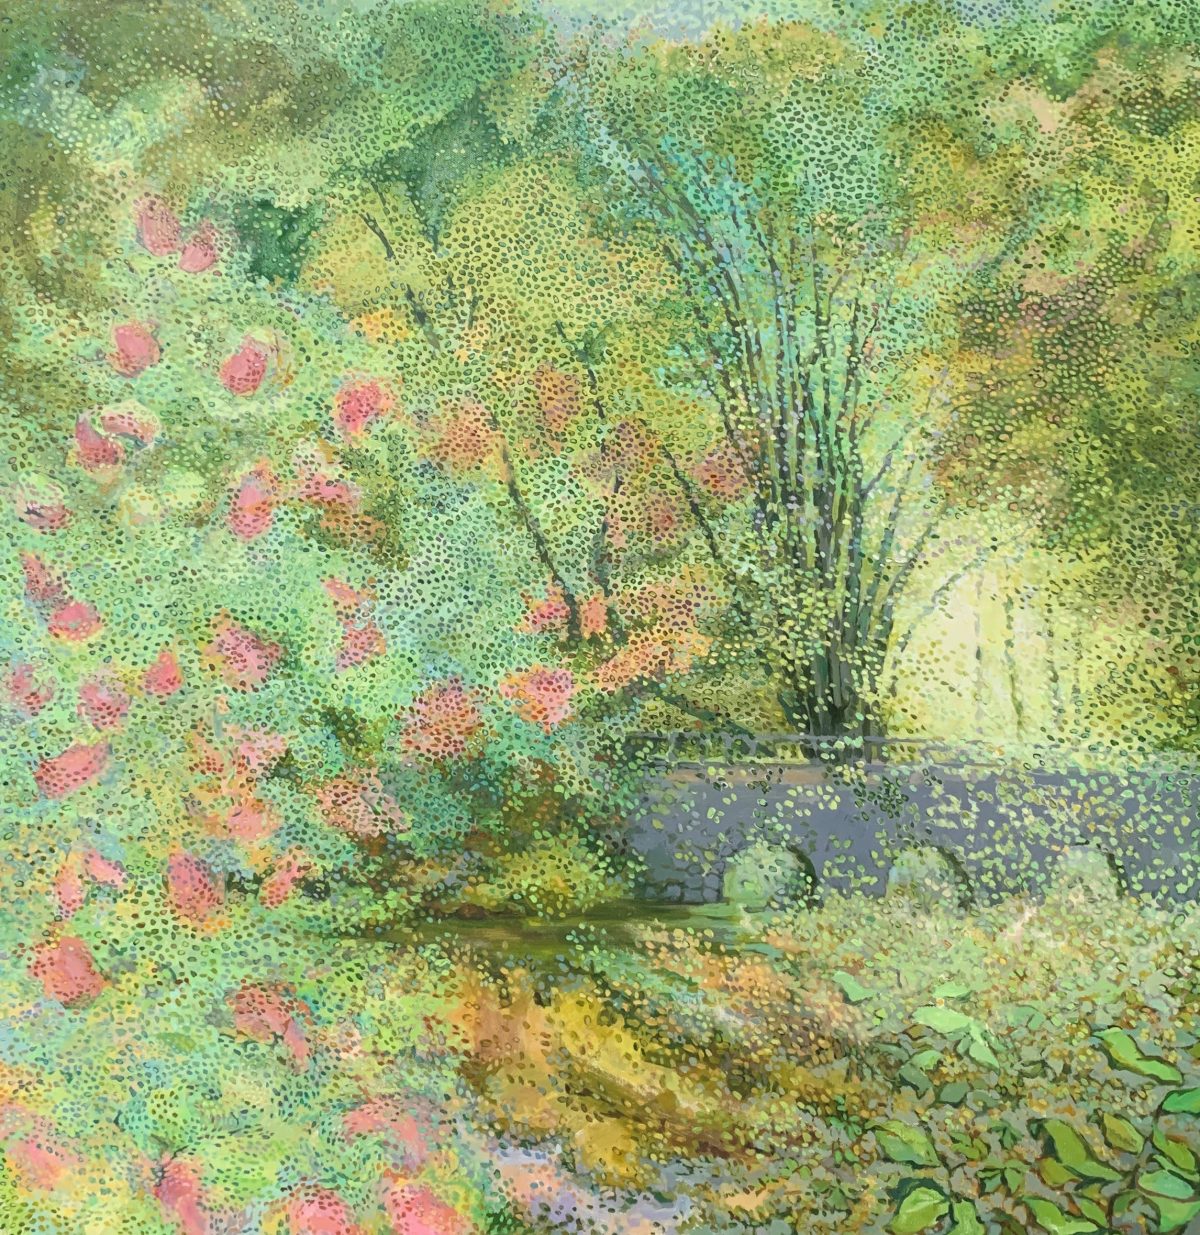 A painting of a misty landscape mixing shades of green and spots of pink.